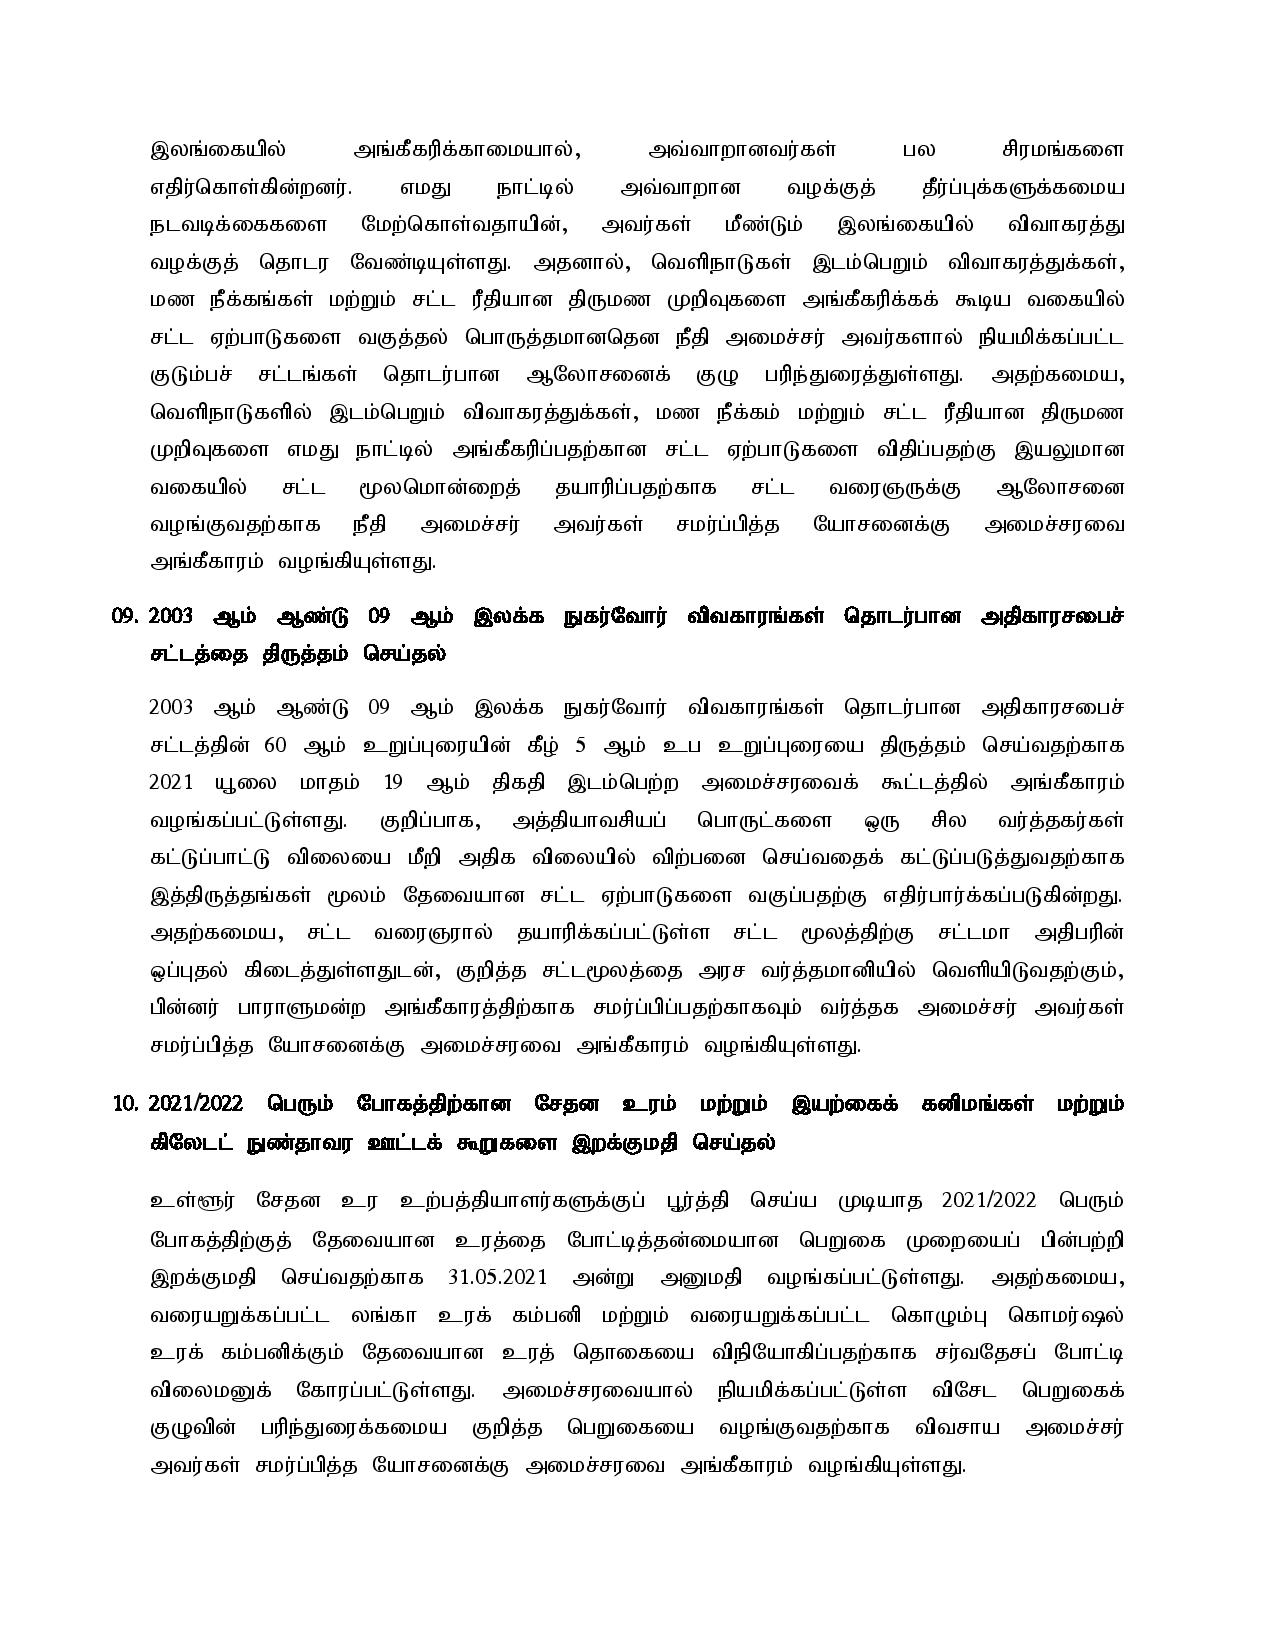 Cabinet Decision on 2021.08.09 Tamil page 004